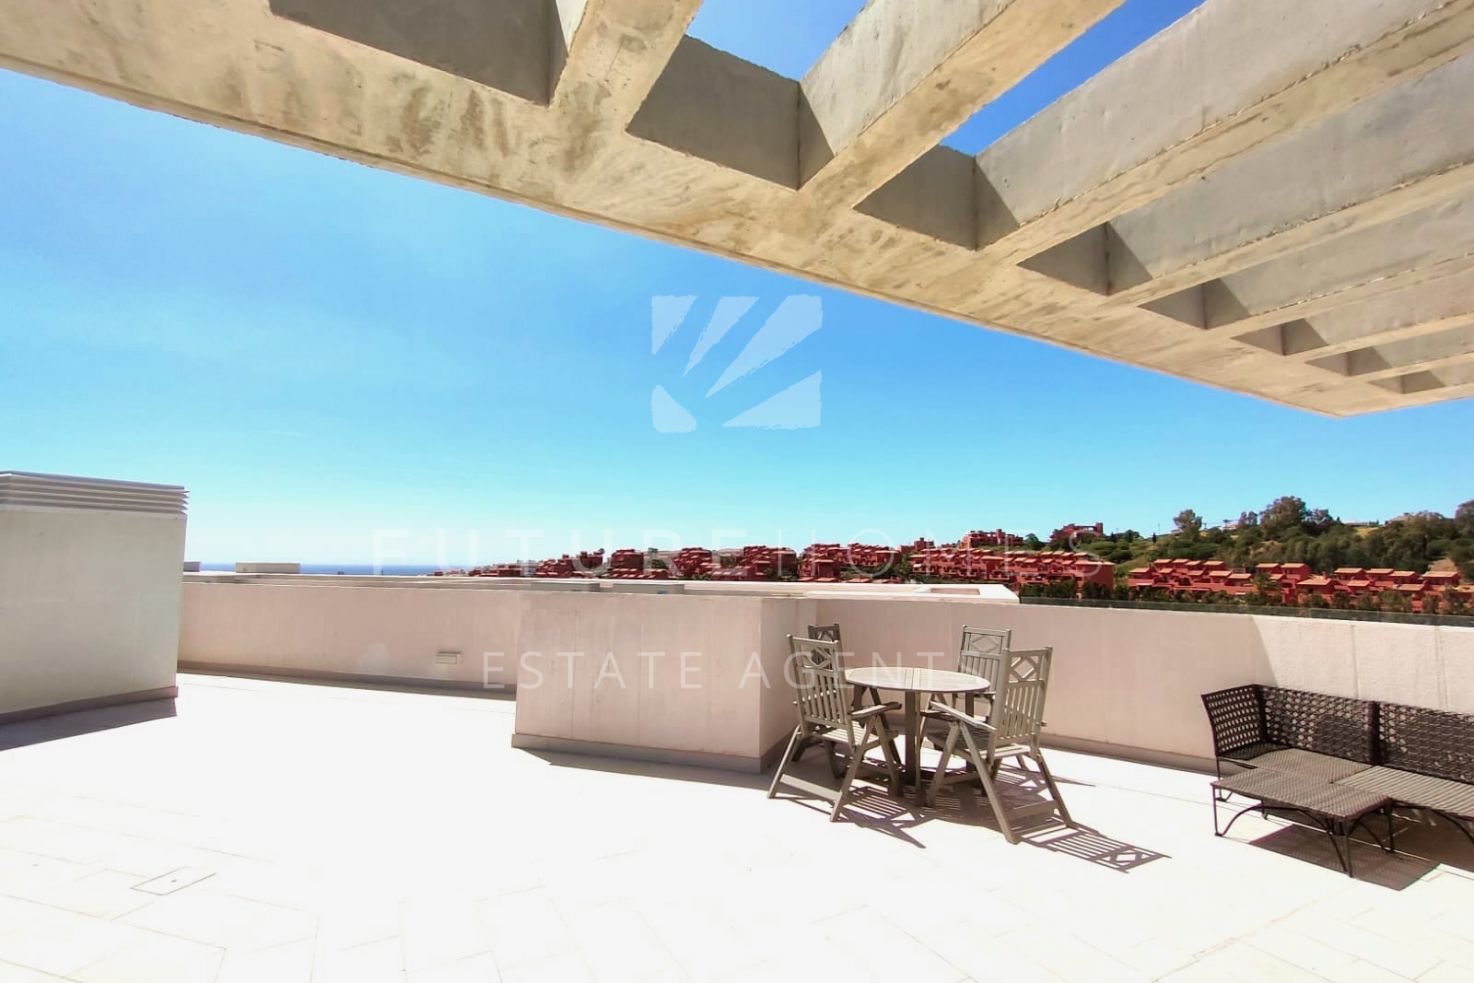 Brand new 2 bedroom penthouse apartment 1km from the beach, West Estepona